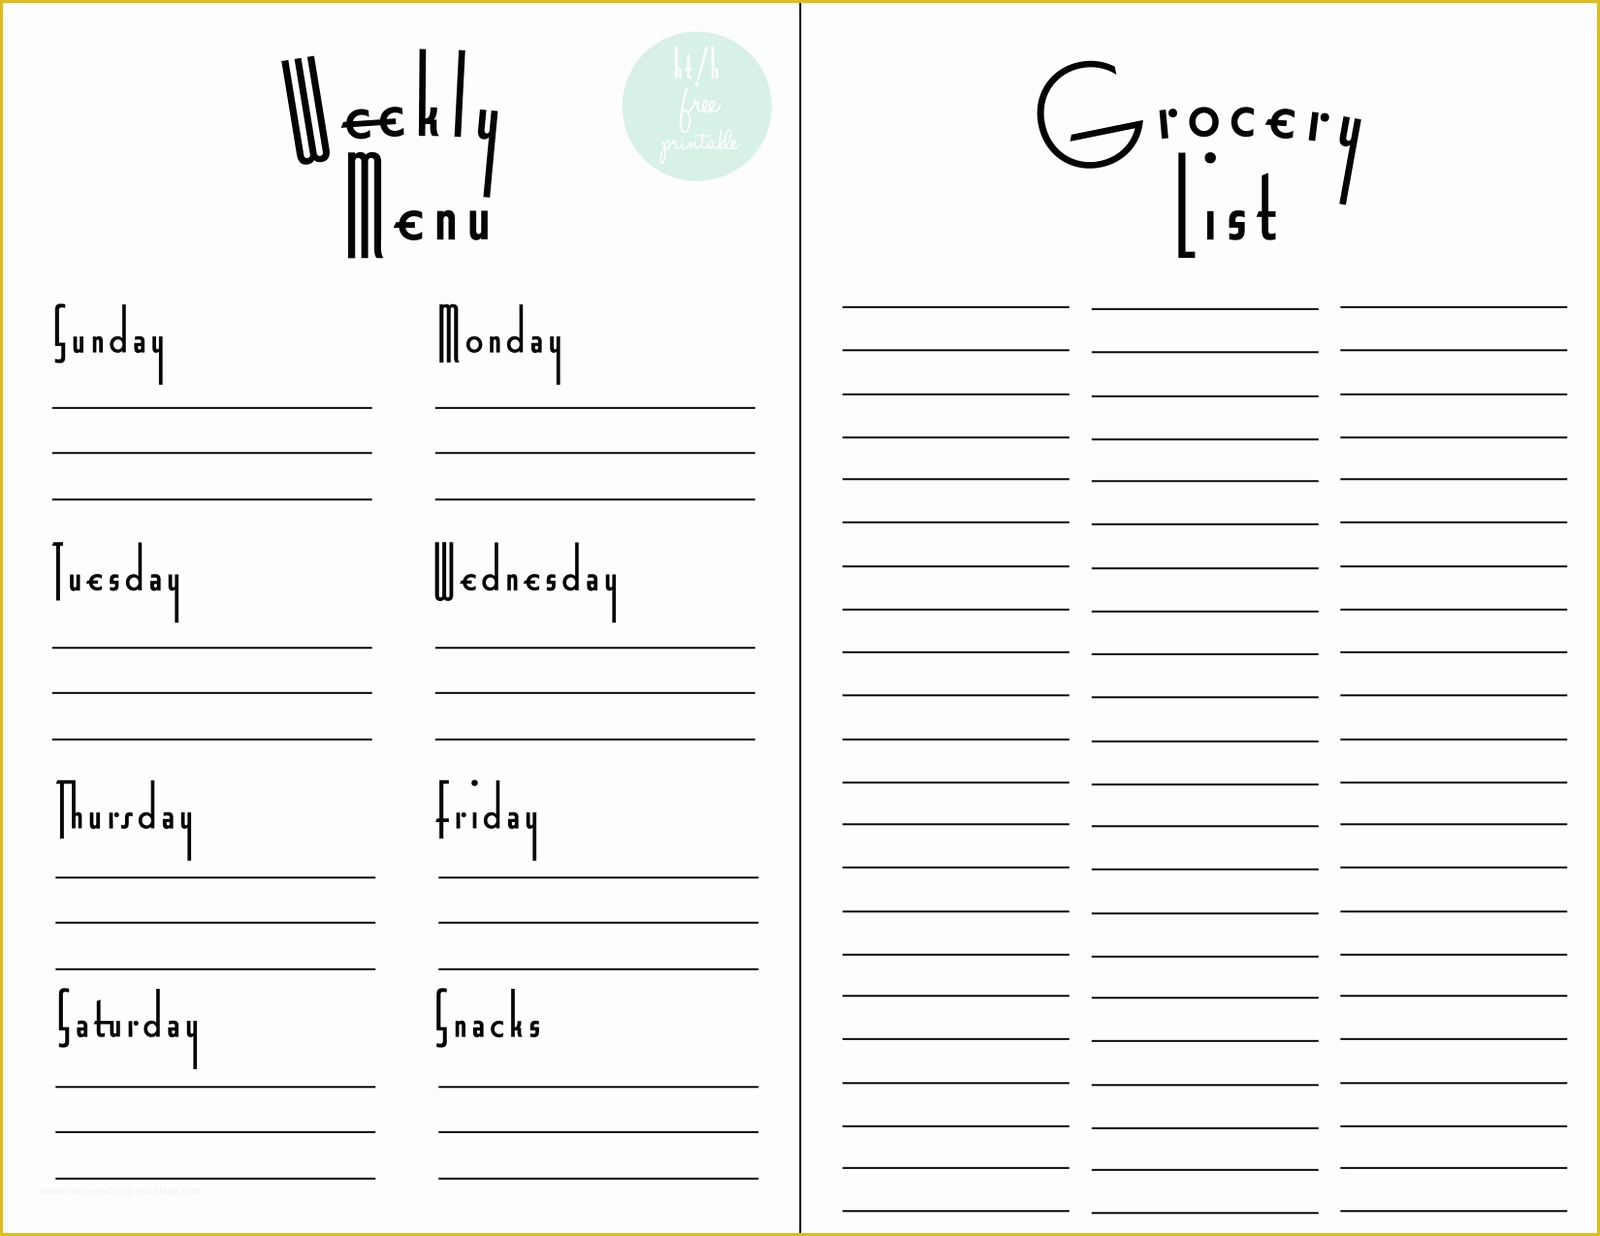 Free Weekly Meal Planner Template with Grocery List Of Weekly Menu Planner & Grocery List Free Printable